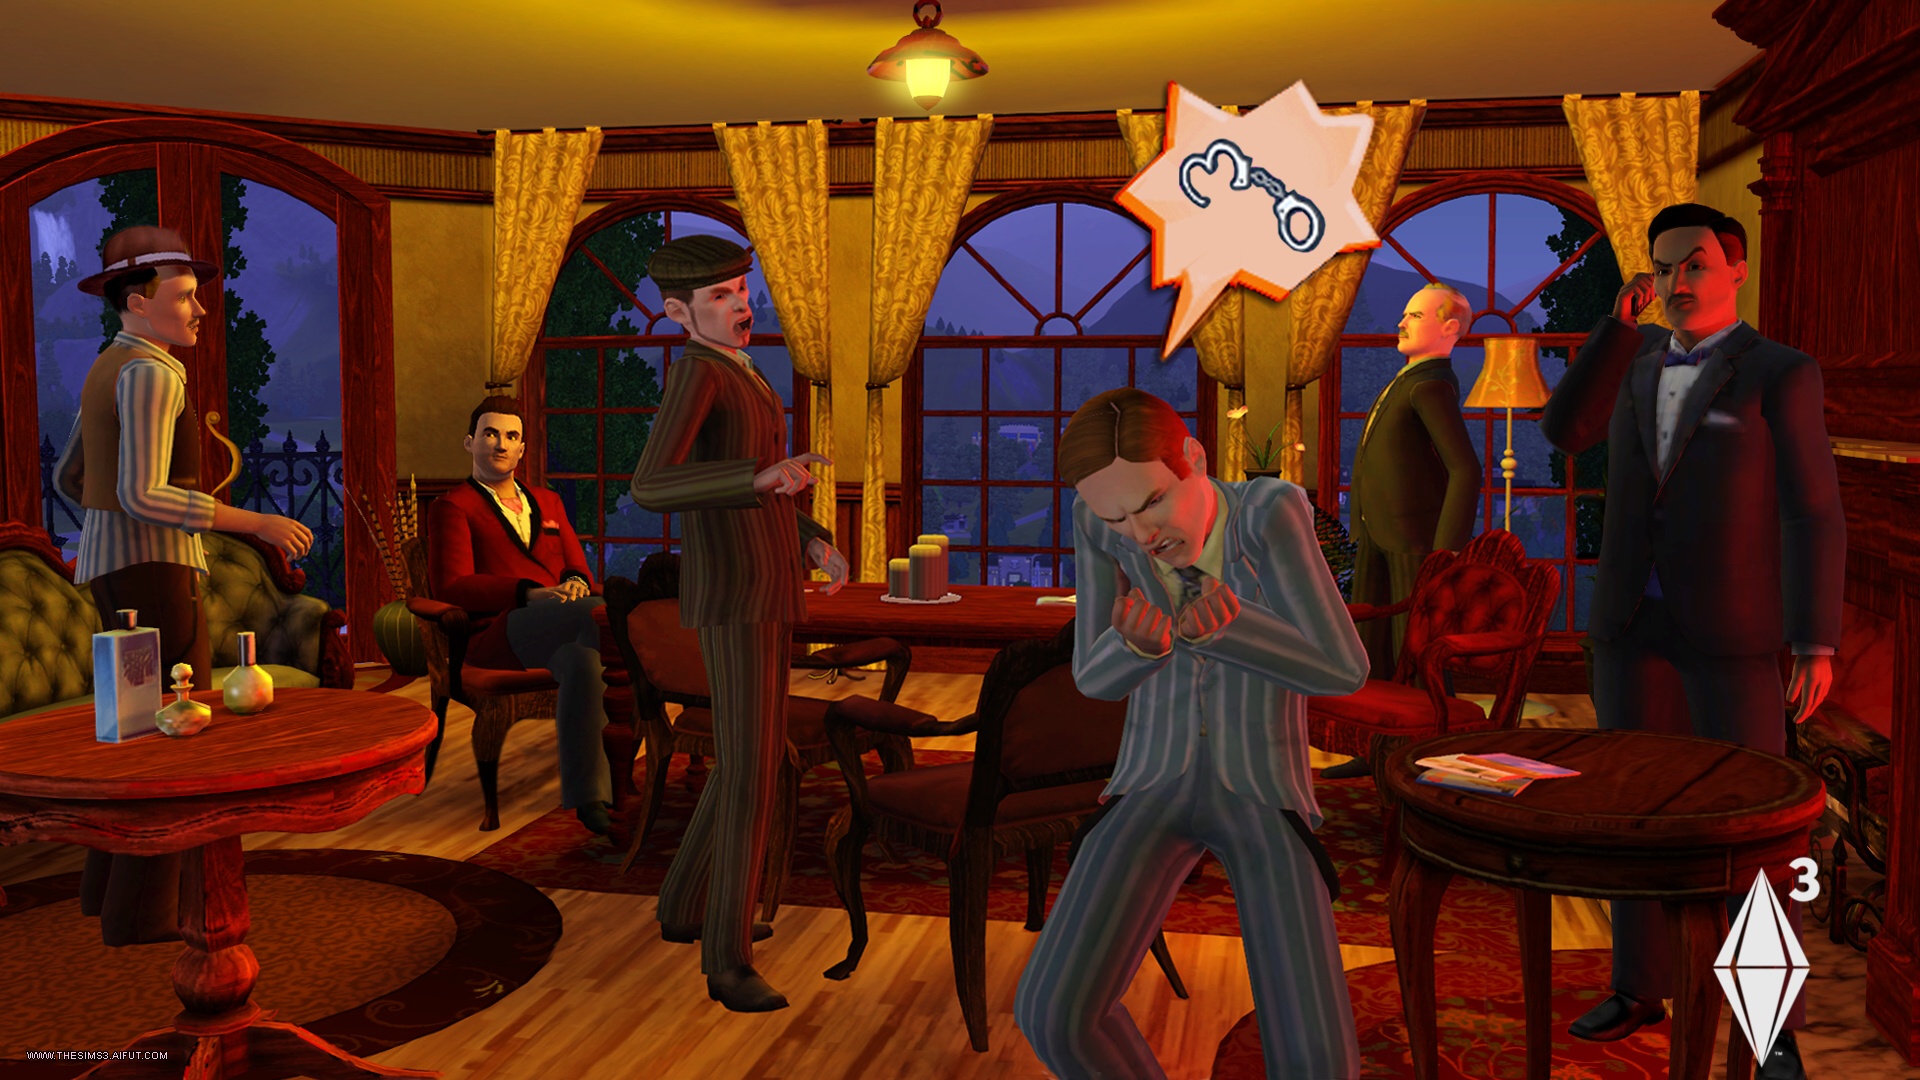 Picture of the game Sims 3